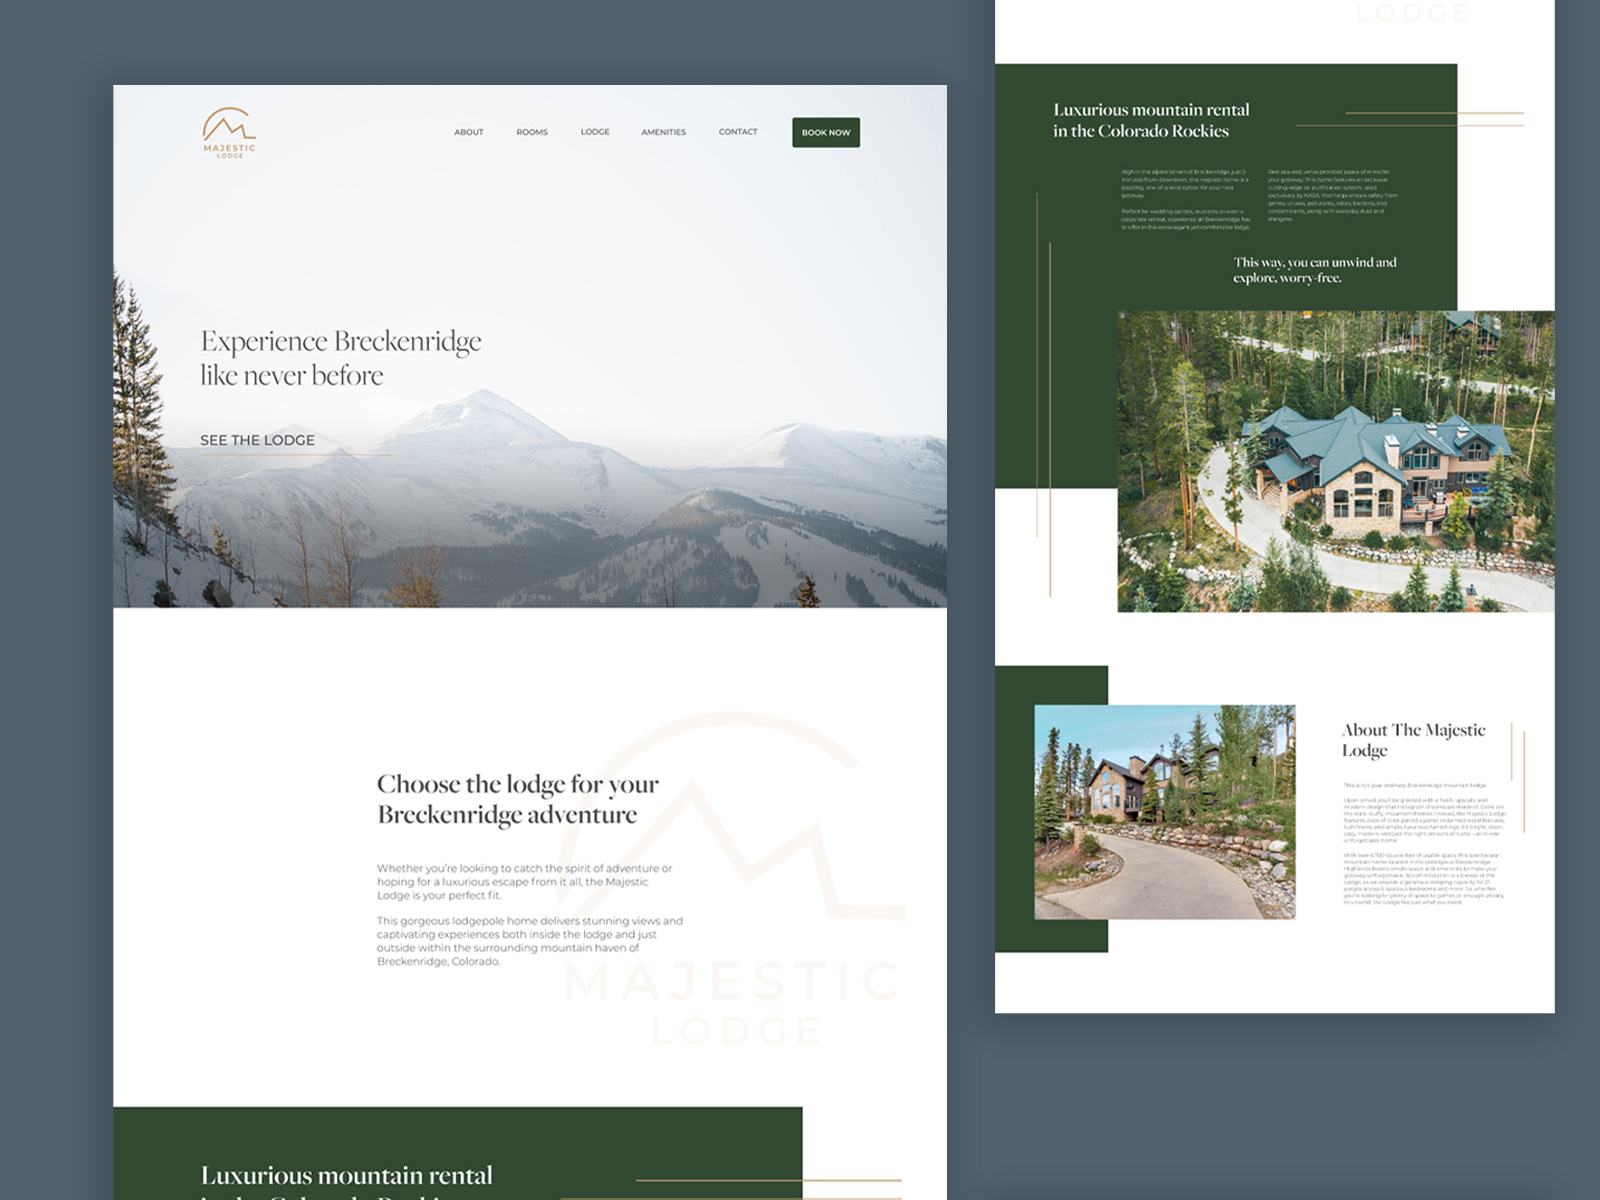 The main page mockup for the Majestic Lodge website